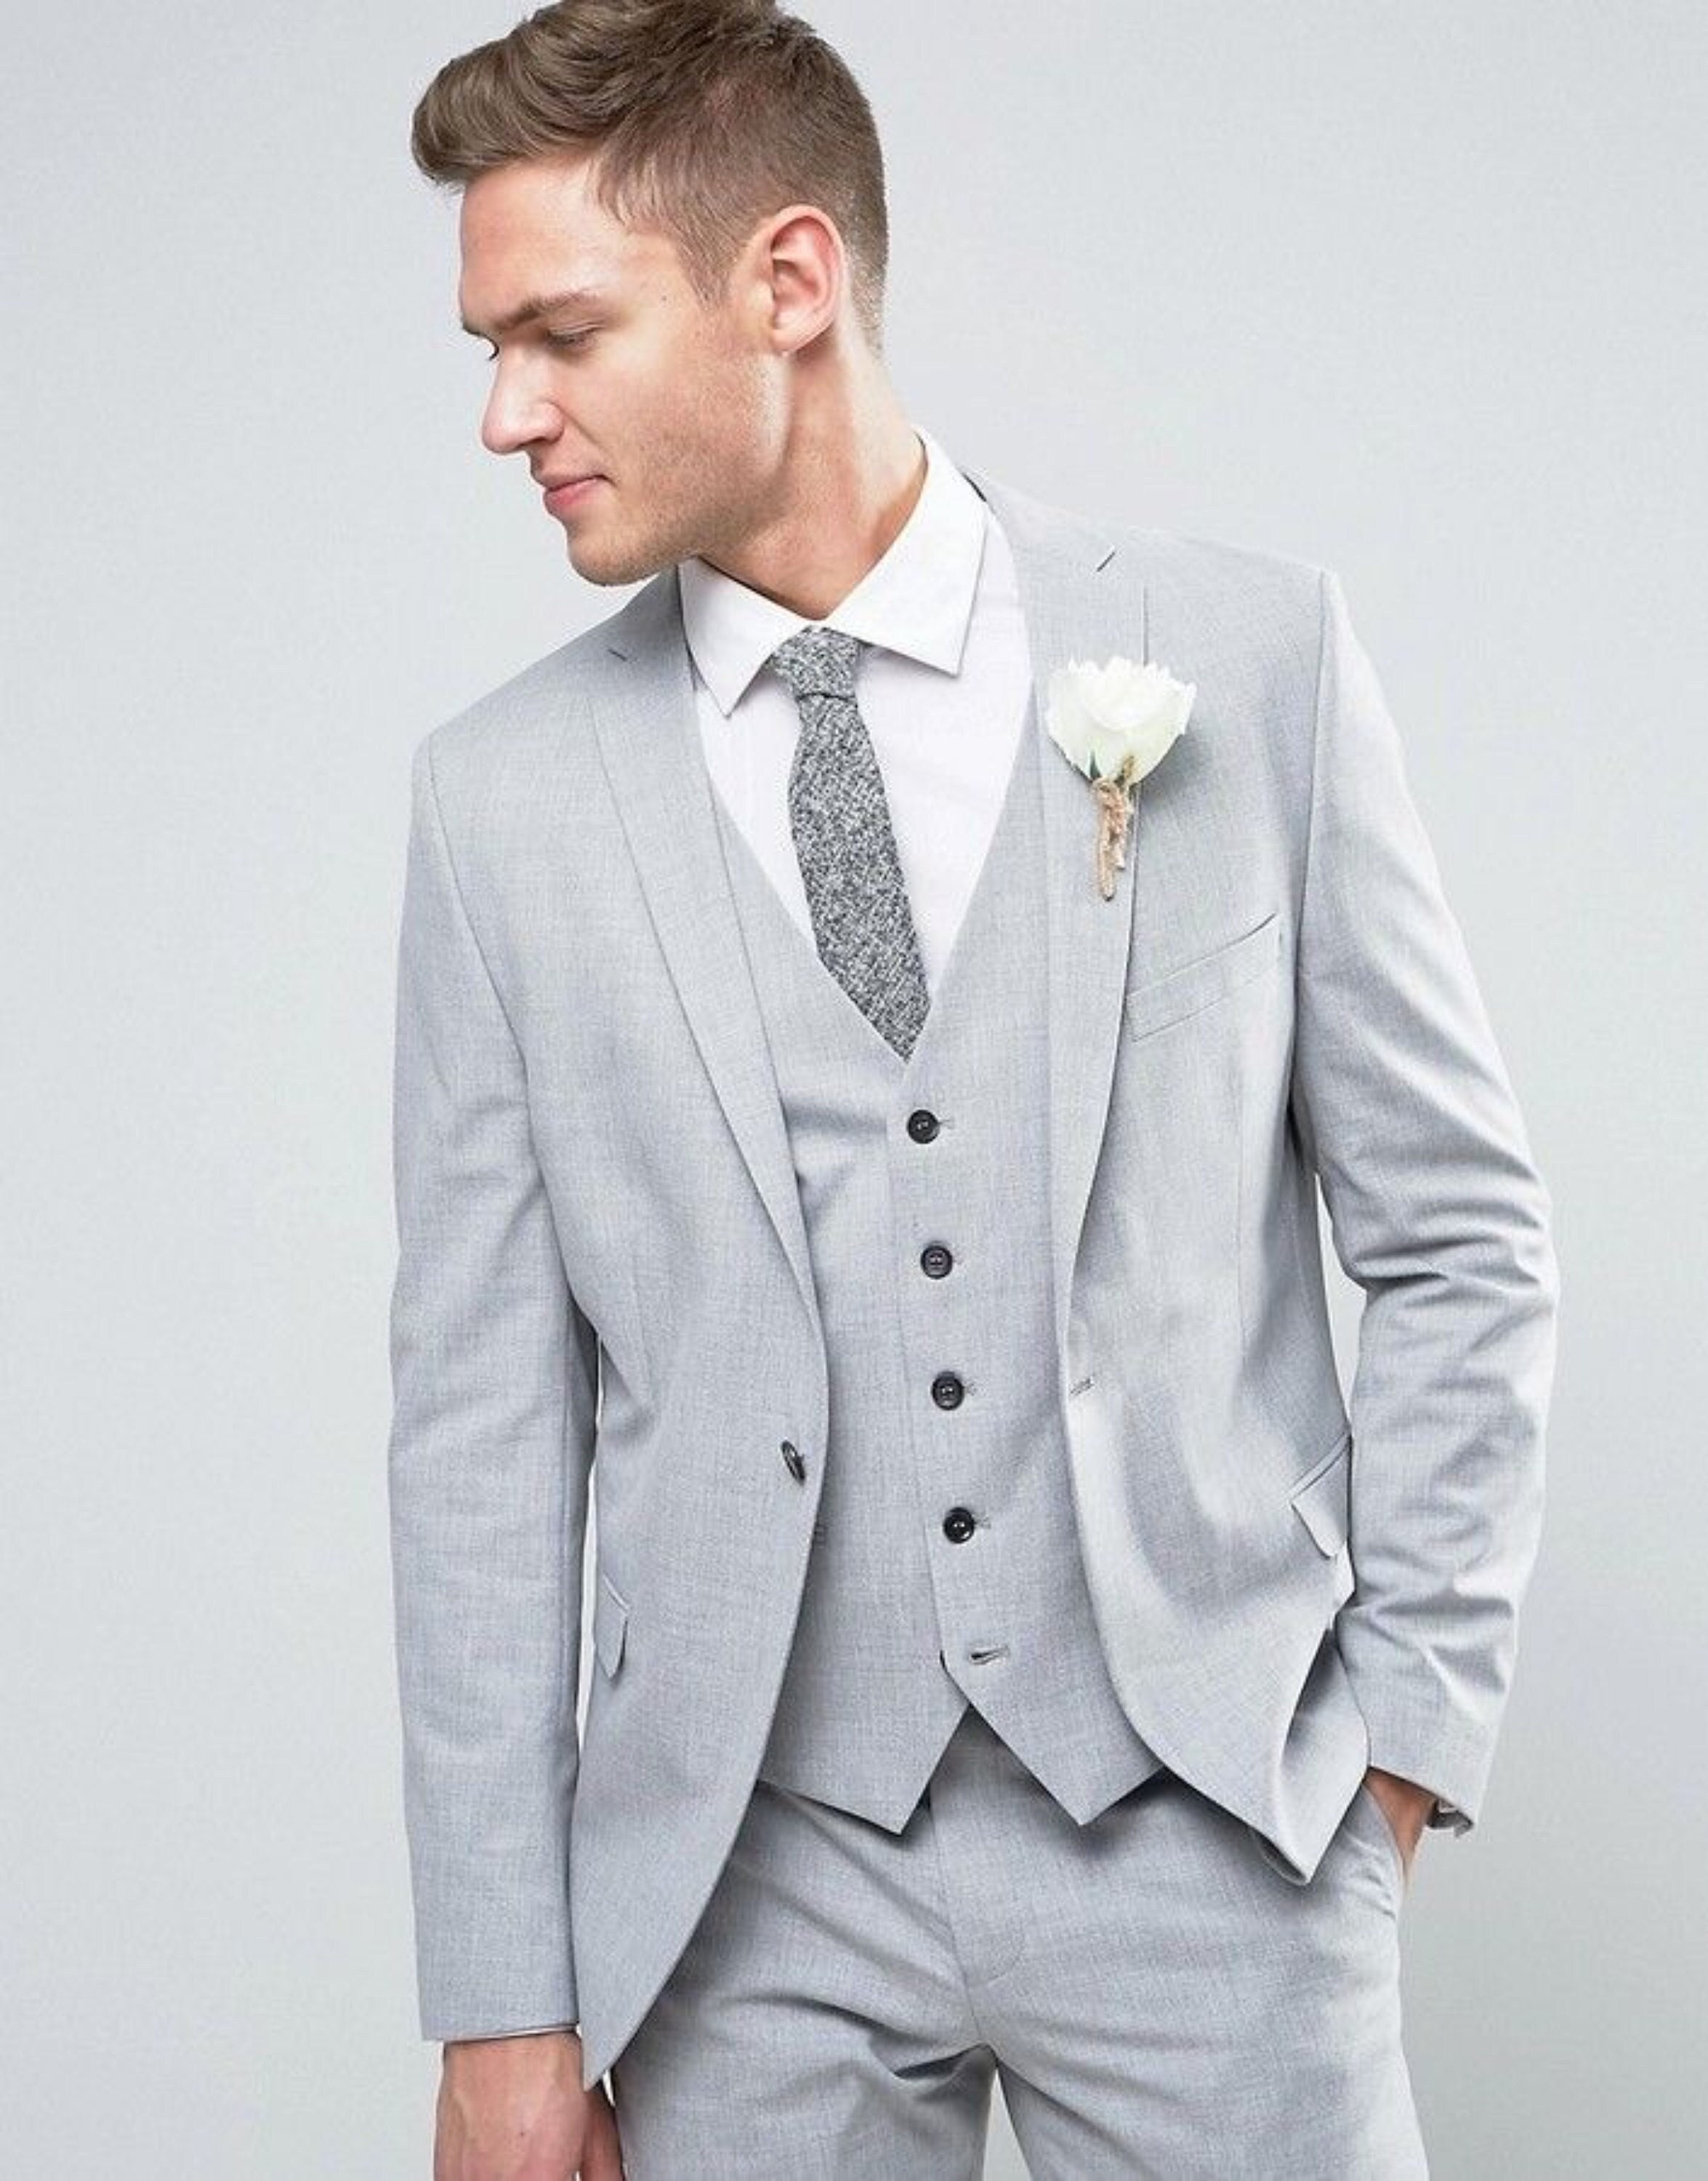 Men's Grey 2 Piece Business Suit Slim Fit Double Breasted Dinner